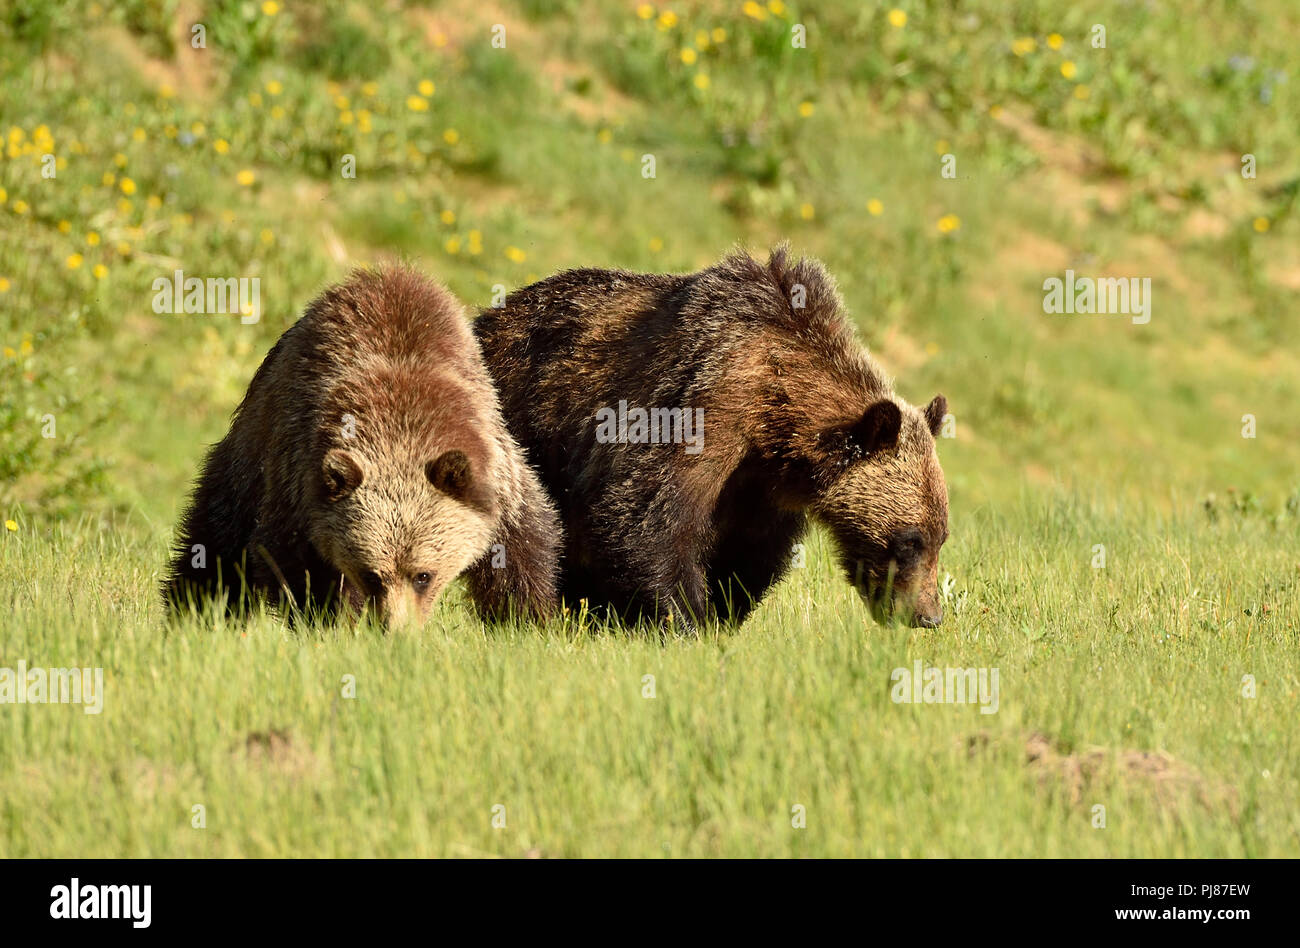 Two juvenile grizzly bears  Ursus arctos; foraging through an open meadow in rural Alberta Canada. Stock Photo